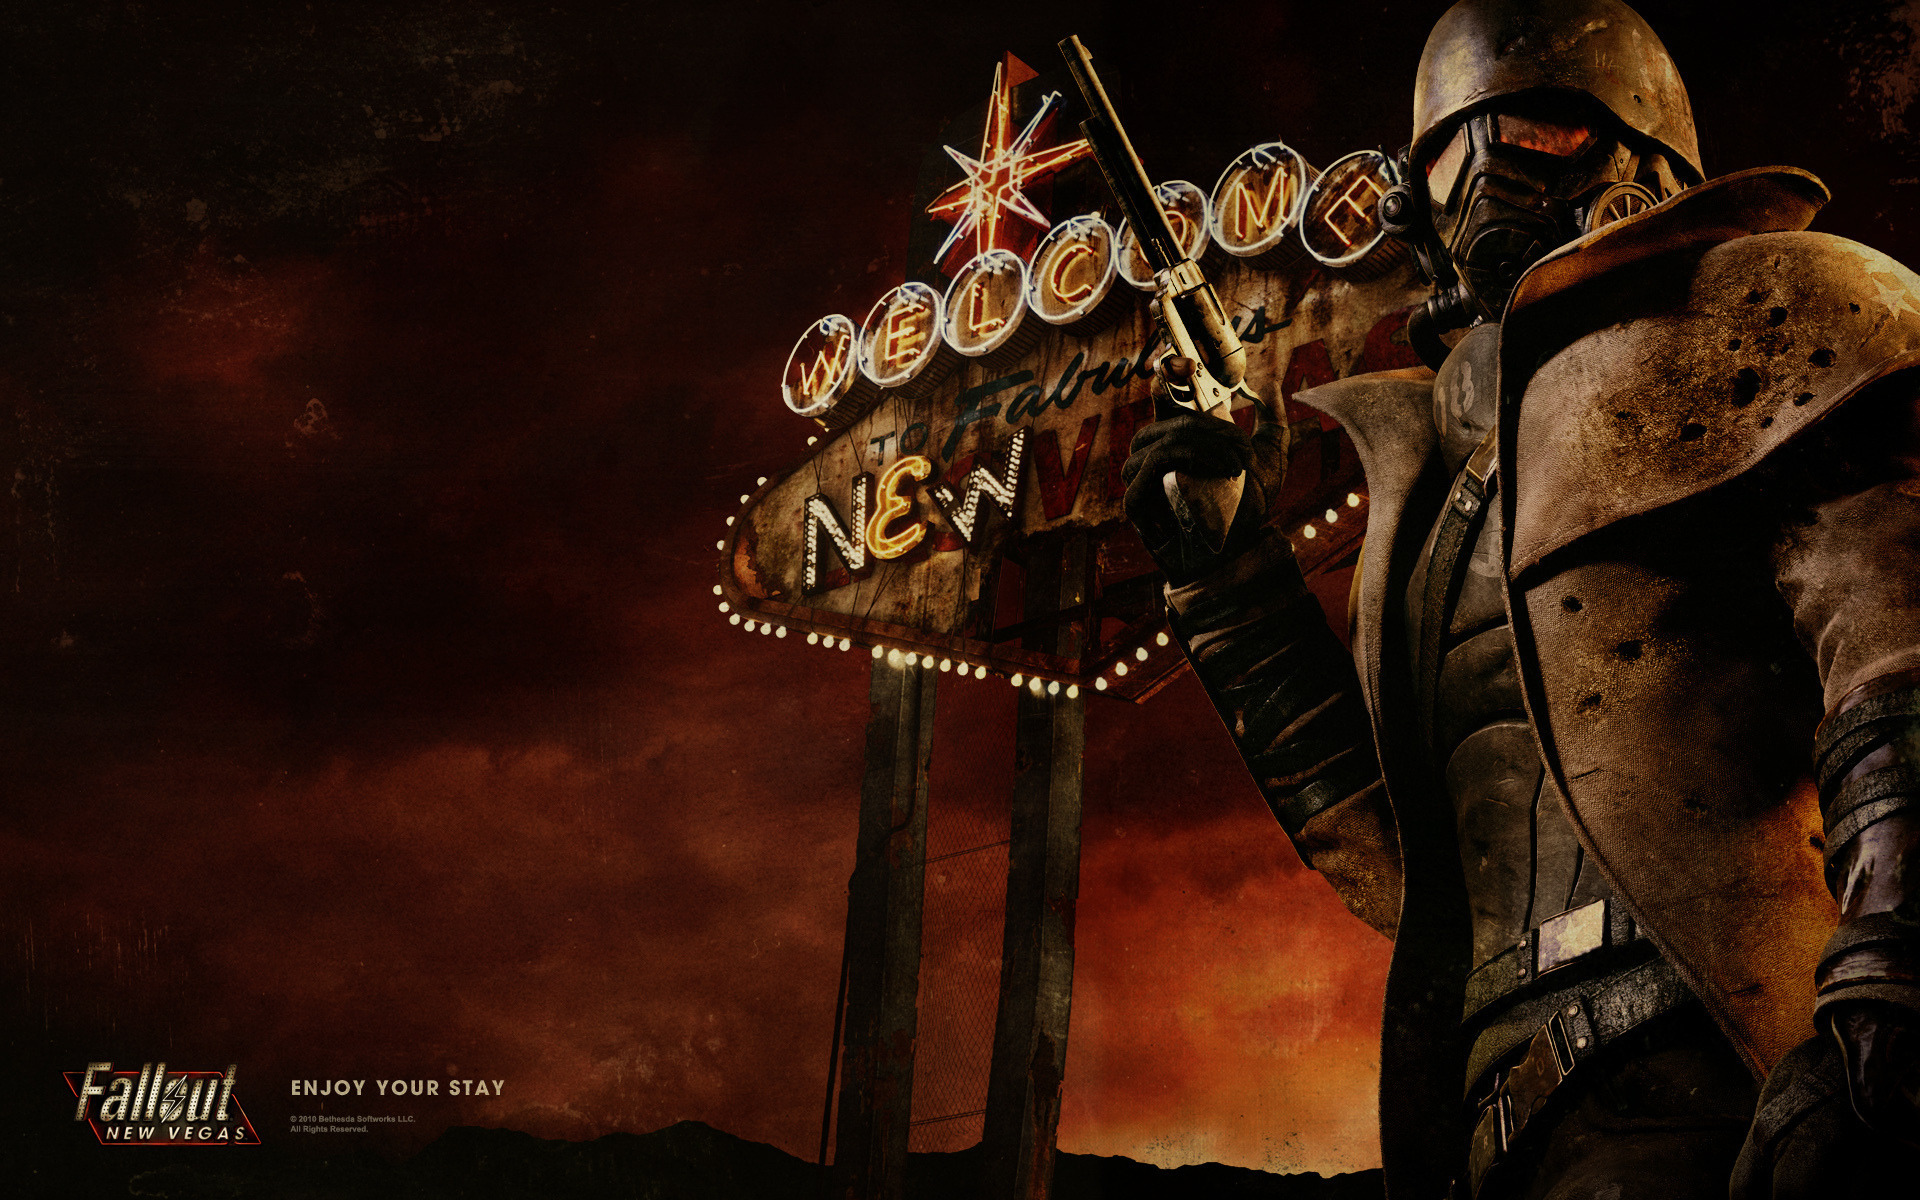 General 1920x1200 Fallout: New Vegas video games gun apocalyptic helmet digital art obsidian New California Republic NCR Bethesda Softworks science fiction revolver weapon video game art PC gaming Obsidian Entertainment